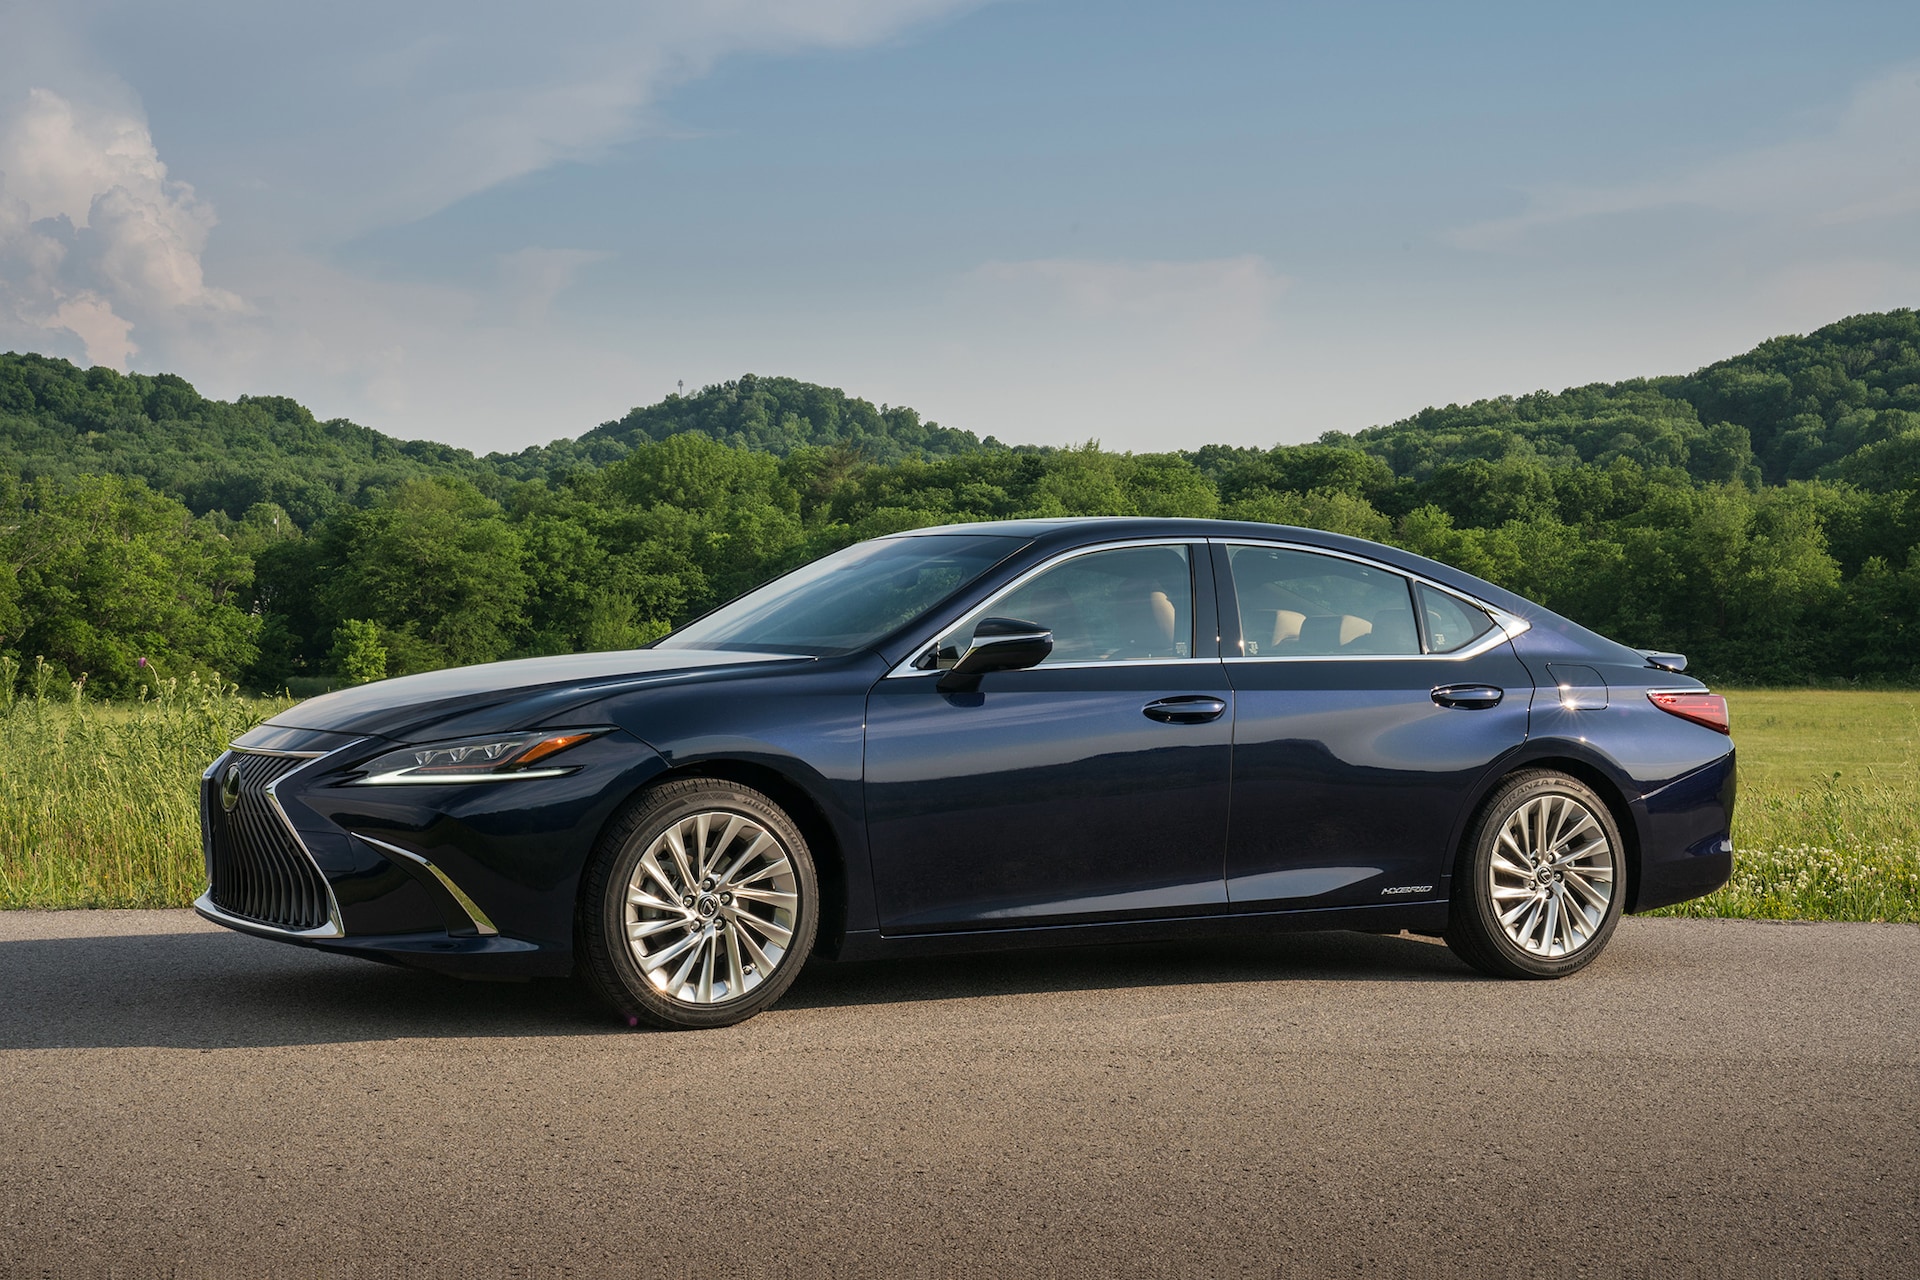 2019 Lexus ES 300h Review: 6 Things to Know